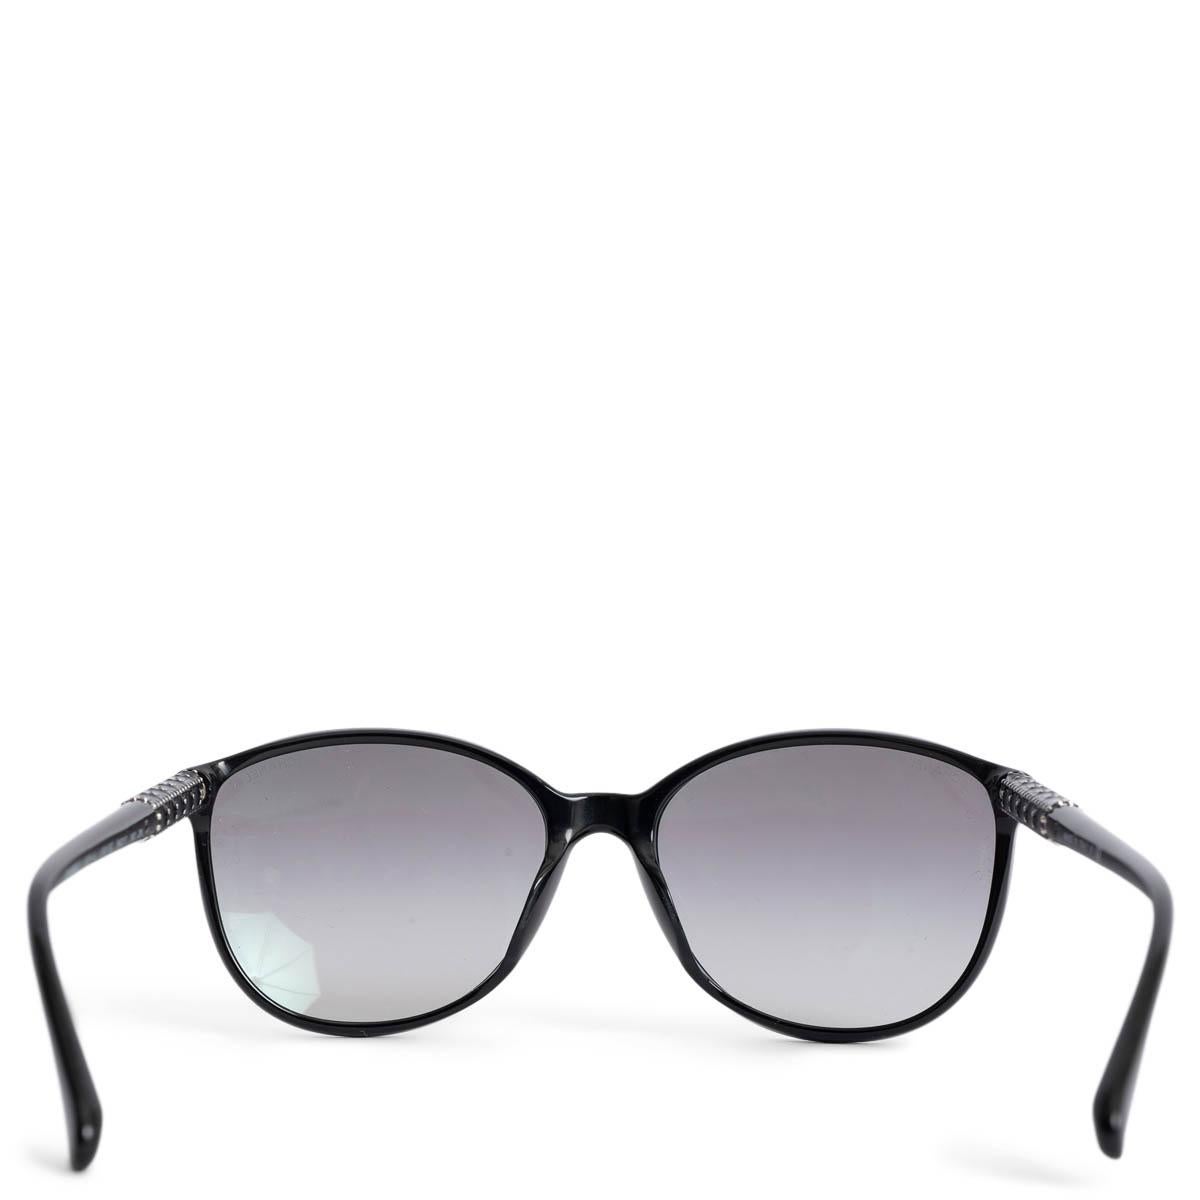 Women's CHANEL black acetate STUDDED CAT-EYE Sunglasses 5207-A For Sale